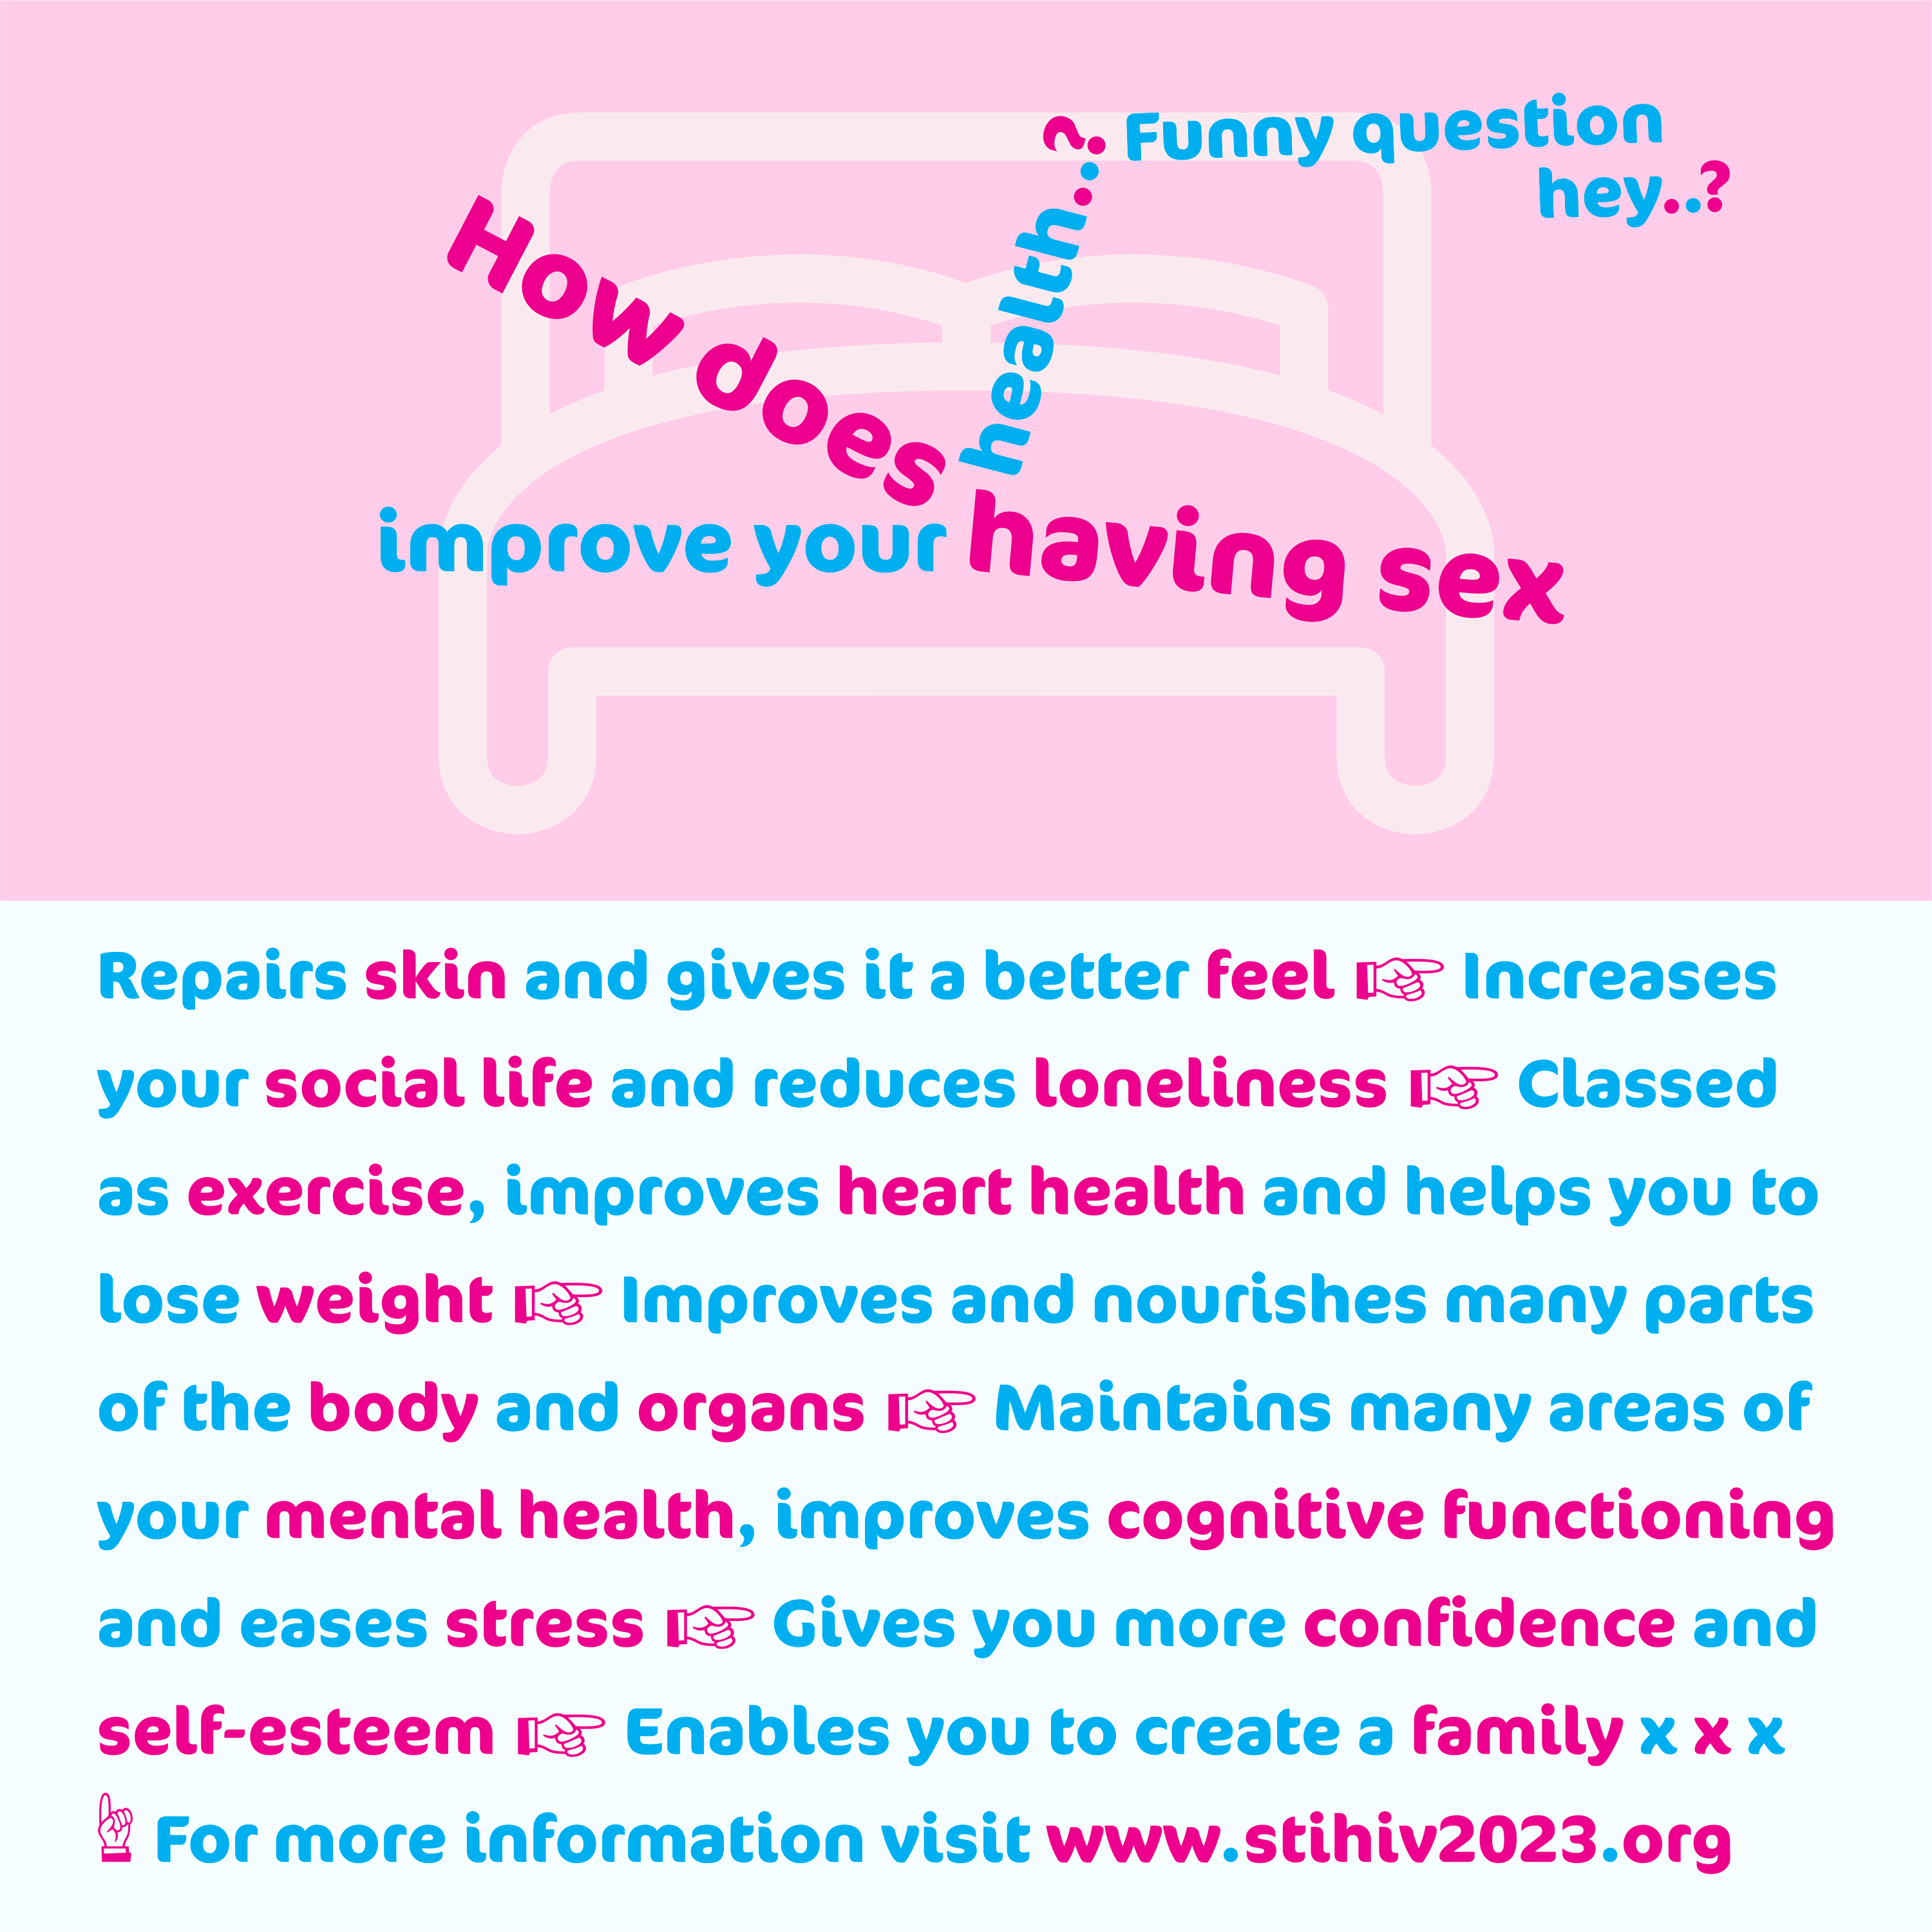 Awareness graphic communication design, at the top are large lines of text arranged in a configuration, of people having sex on a pink bed, that say ‘How does having sex improve your health..? Funny question hey..?’. Then below on 9 lines it says ‘Repairs skin and gives it a better feel. Increases your social life and reduces loneliness. Classed as exercise, improves heart health and helps you to lose weight. Improves and nourishes many parts of the body and organs. Maintains many areas of your mental health, improves cognitive functioning and eases stress. Gives you more confidence and self-esteem. Enables you to create a family x x x. For more information visit www.stihiv2023.org’. All the text is in a cool typeface.